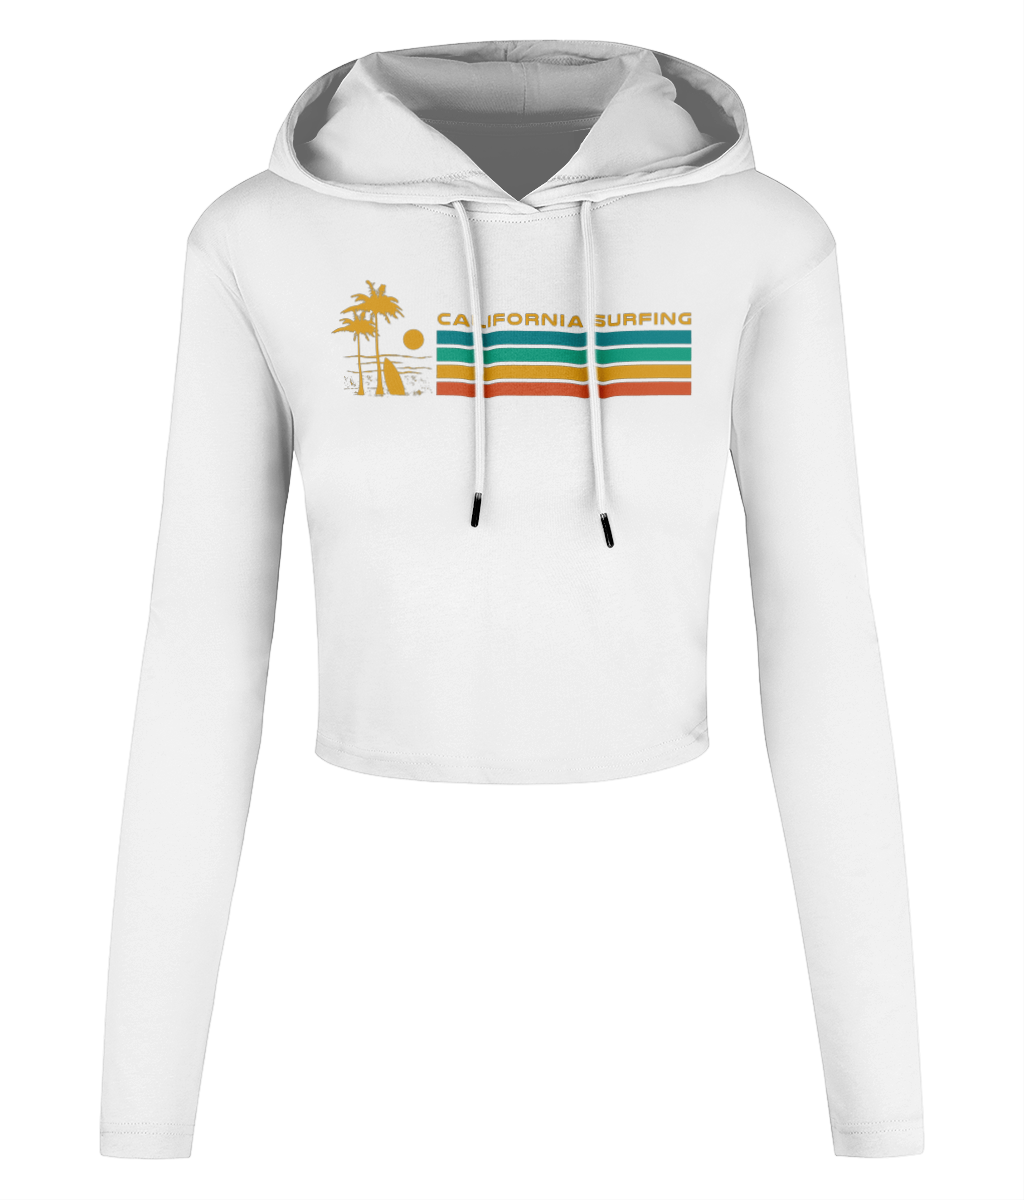 California Surfing - Women's Cropped Hooded T-shirt